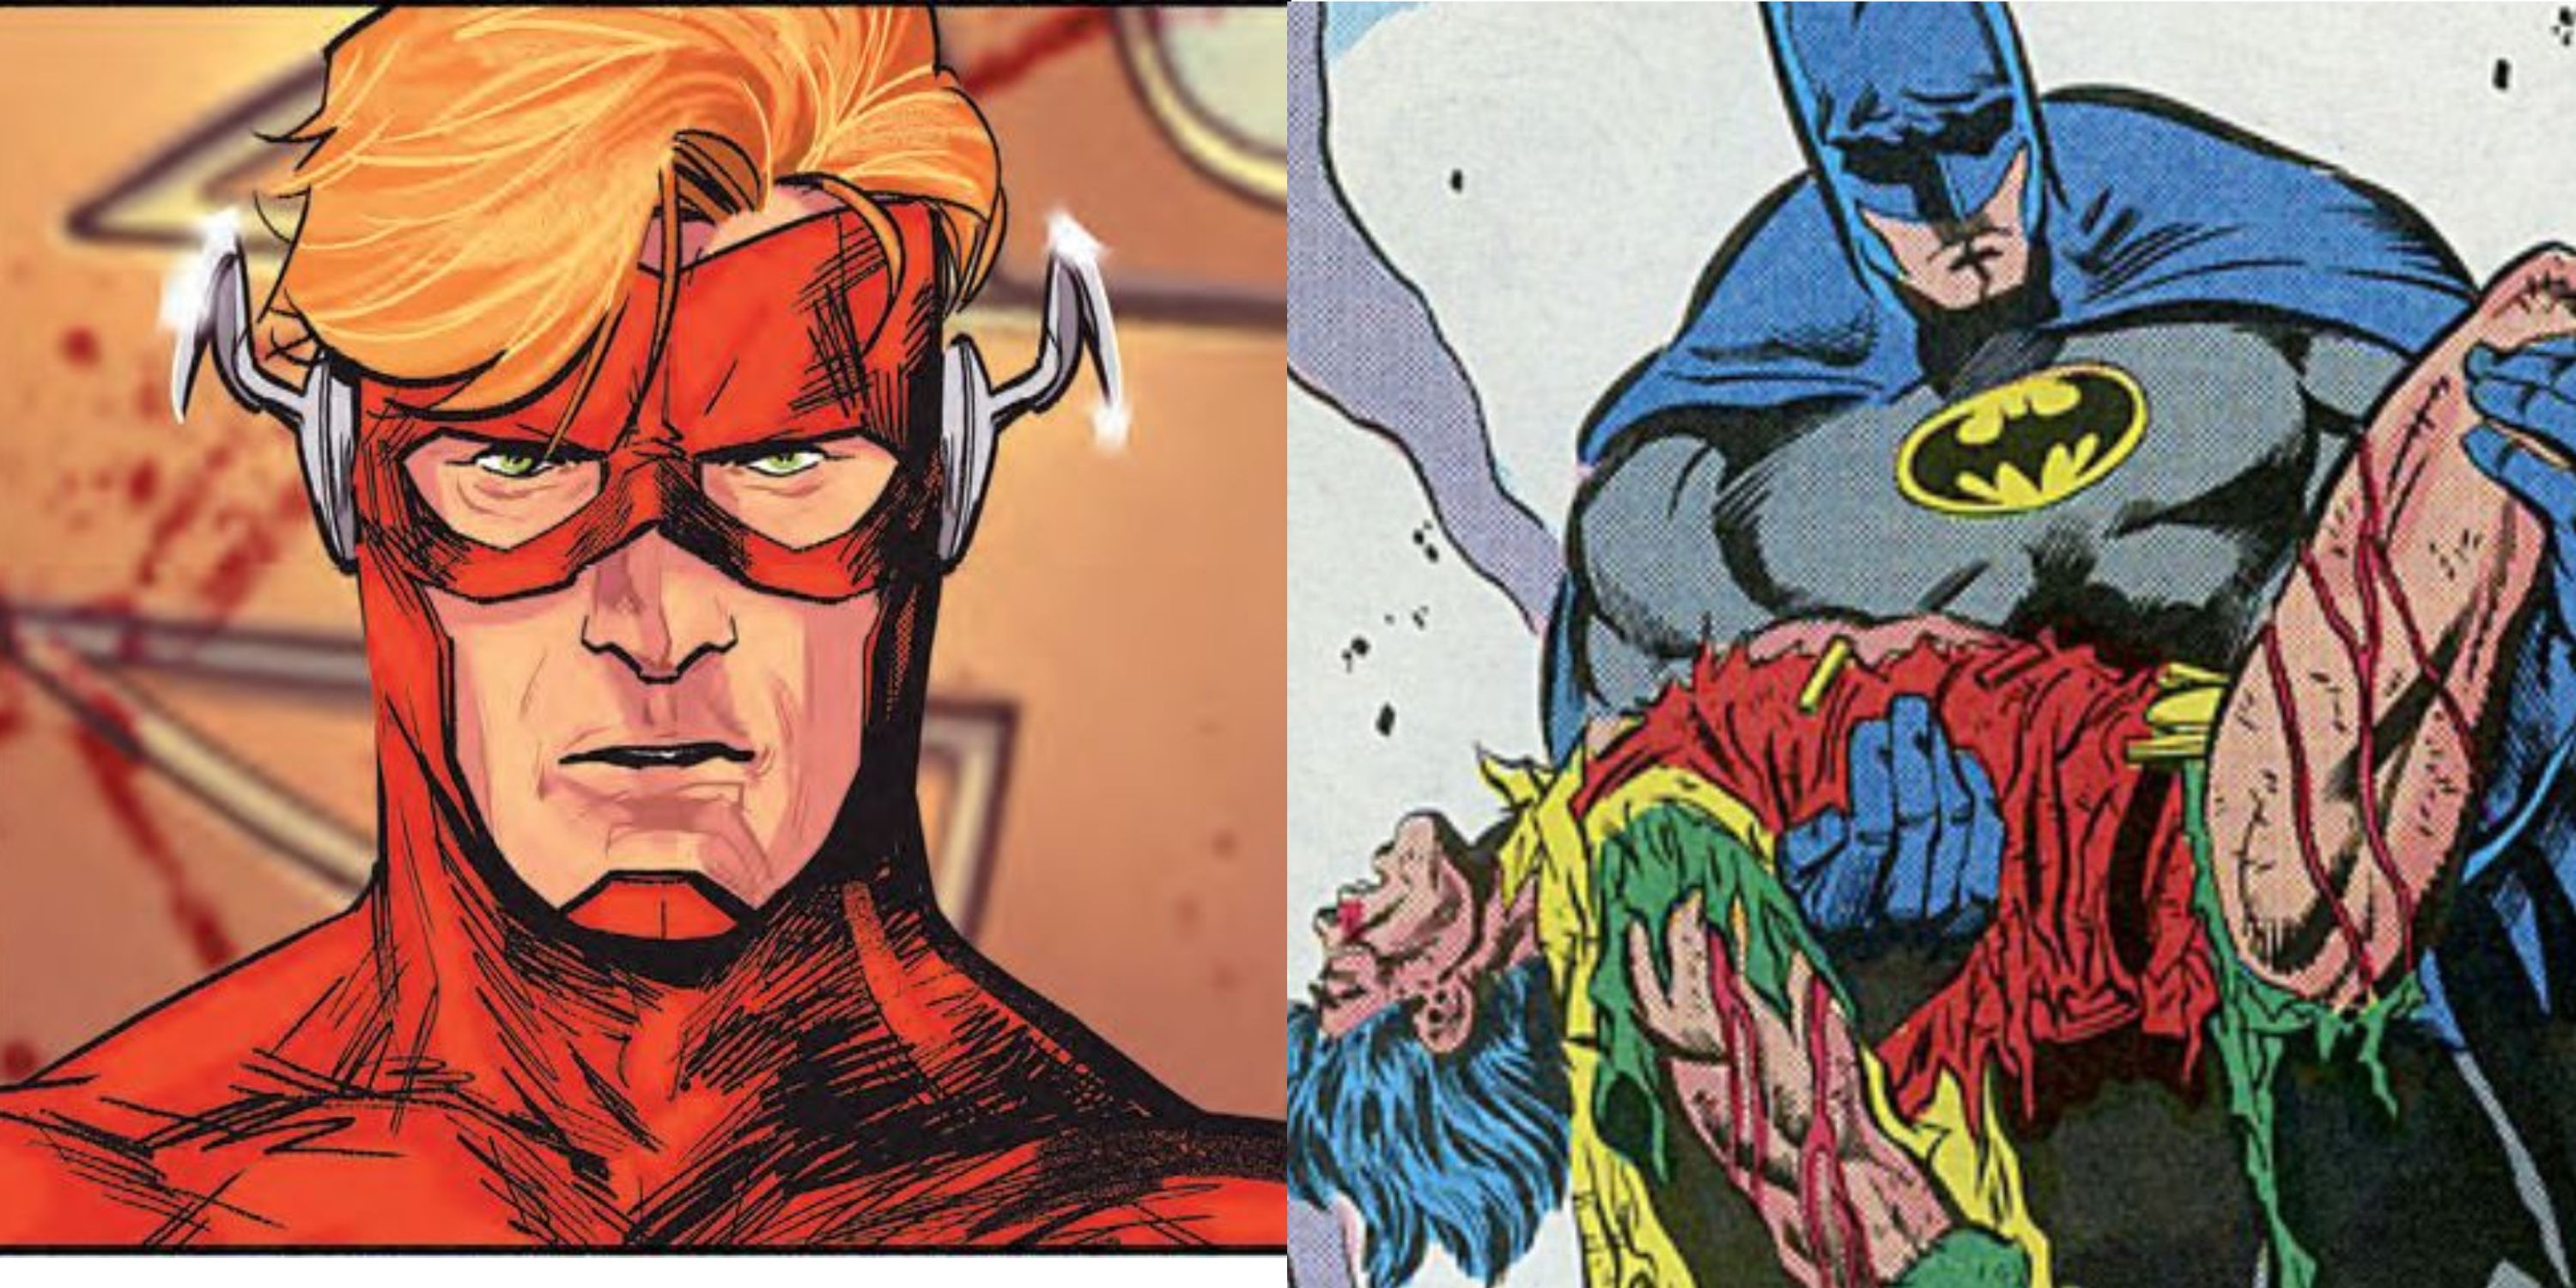 Split image: Wally West in Heroes in Crisis and Batman holding the body of Jason Todd